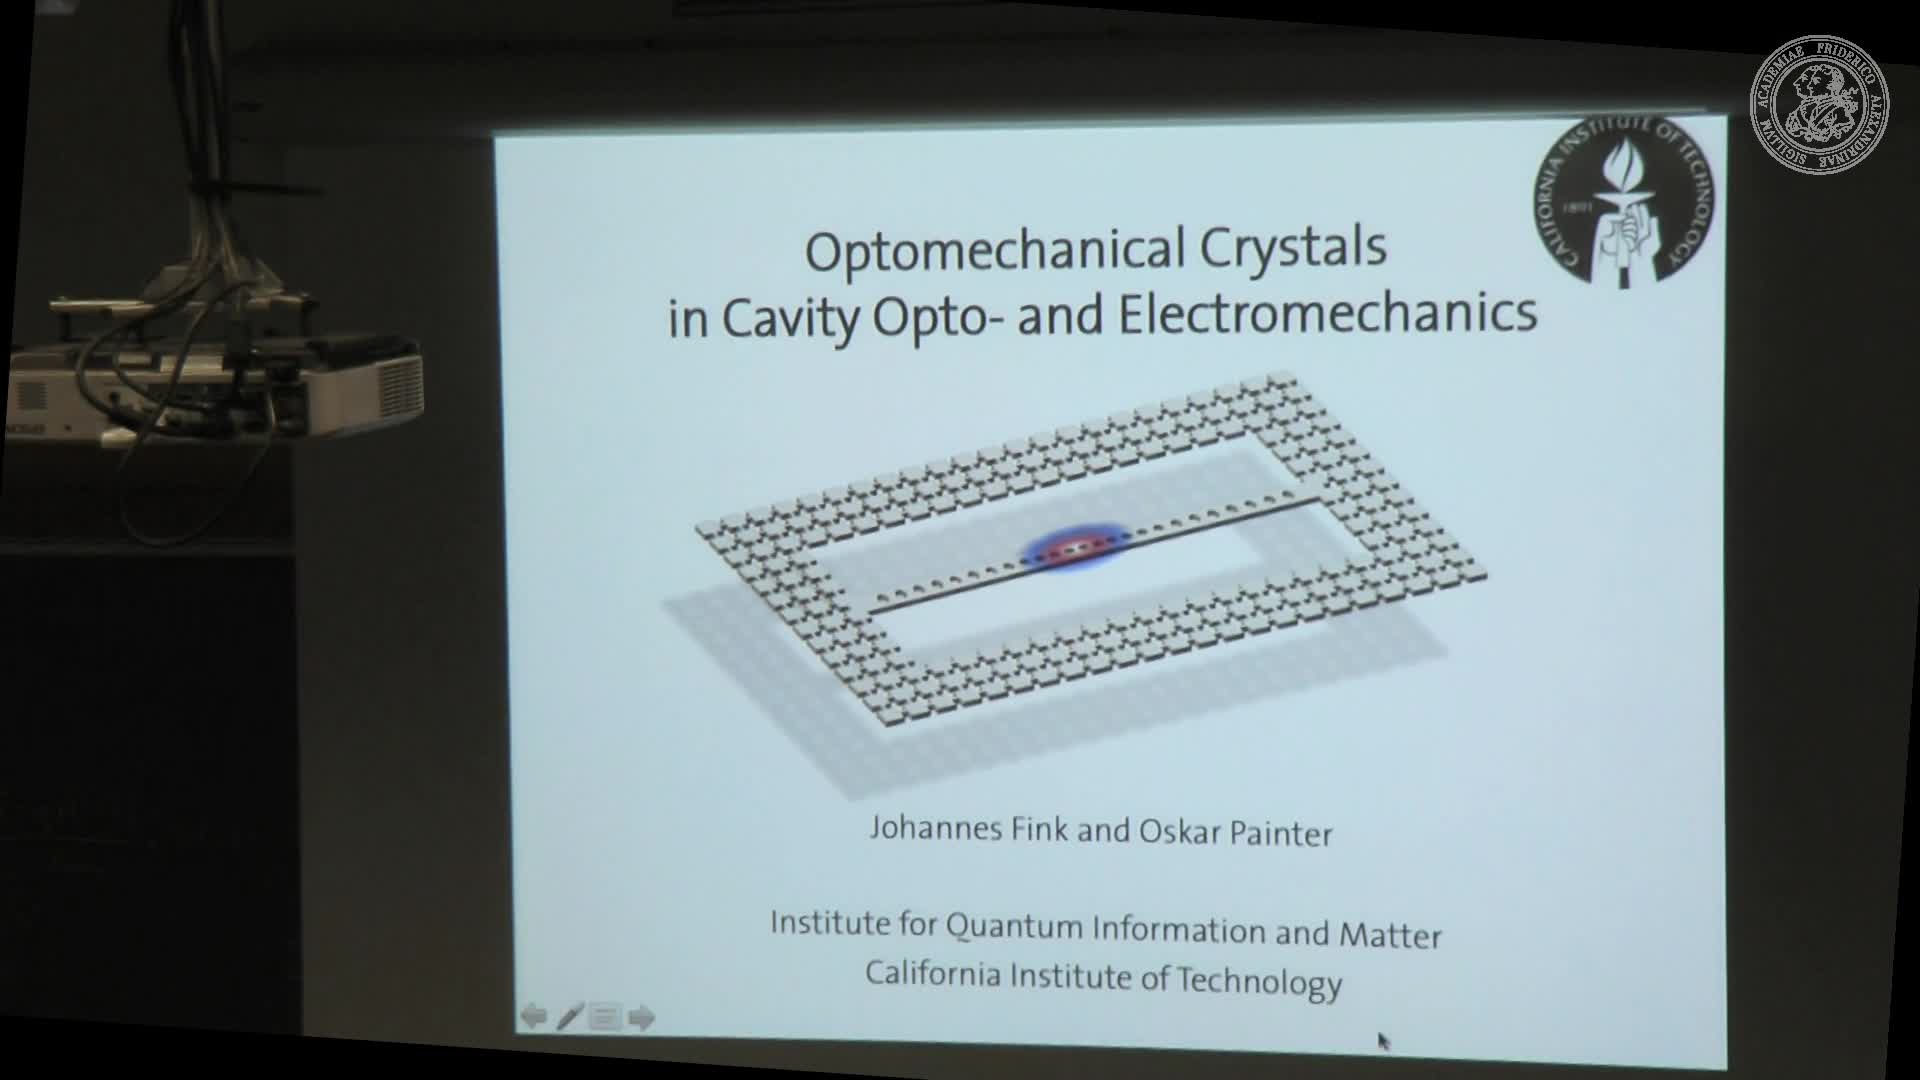 Optomechanical Crystals in Cavity Opto- and Electromechanics - 1 preview image